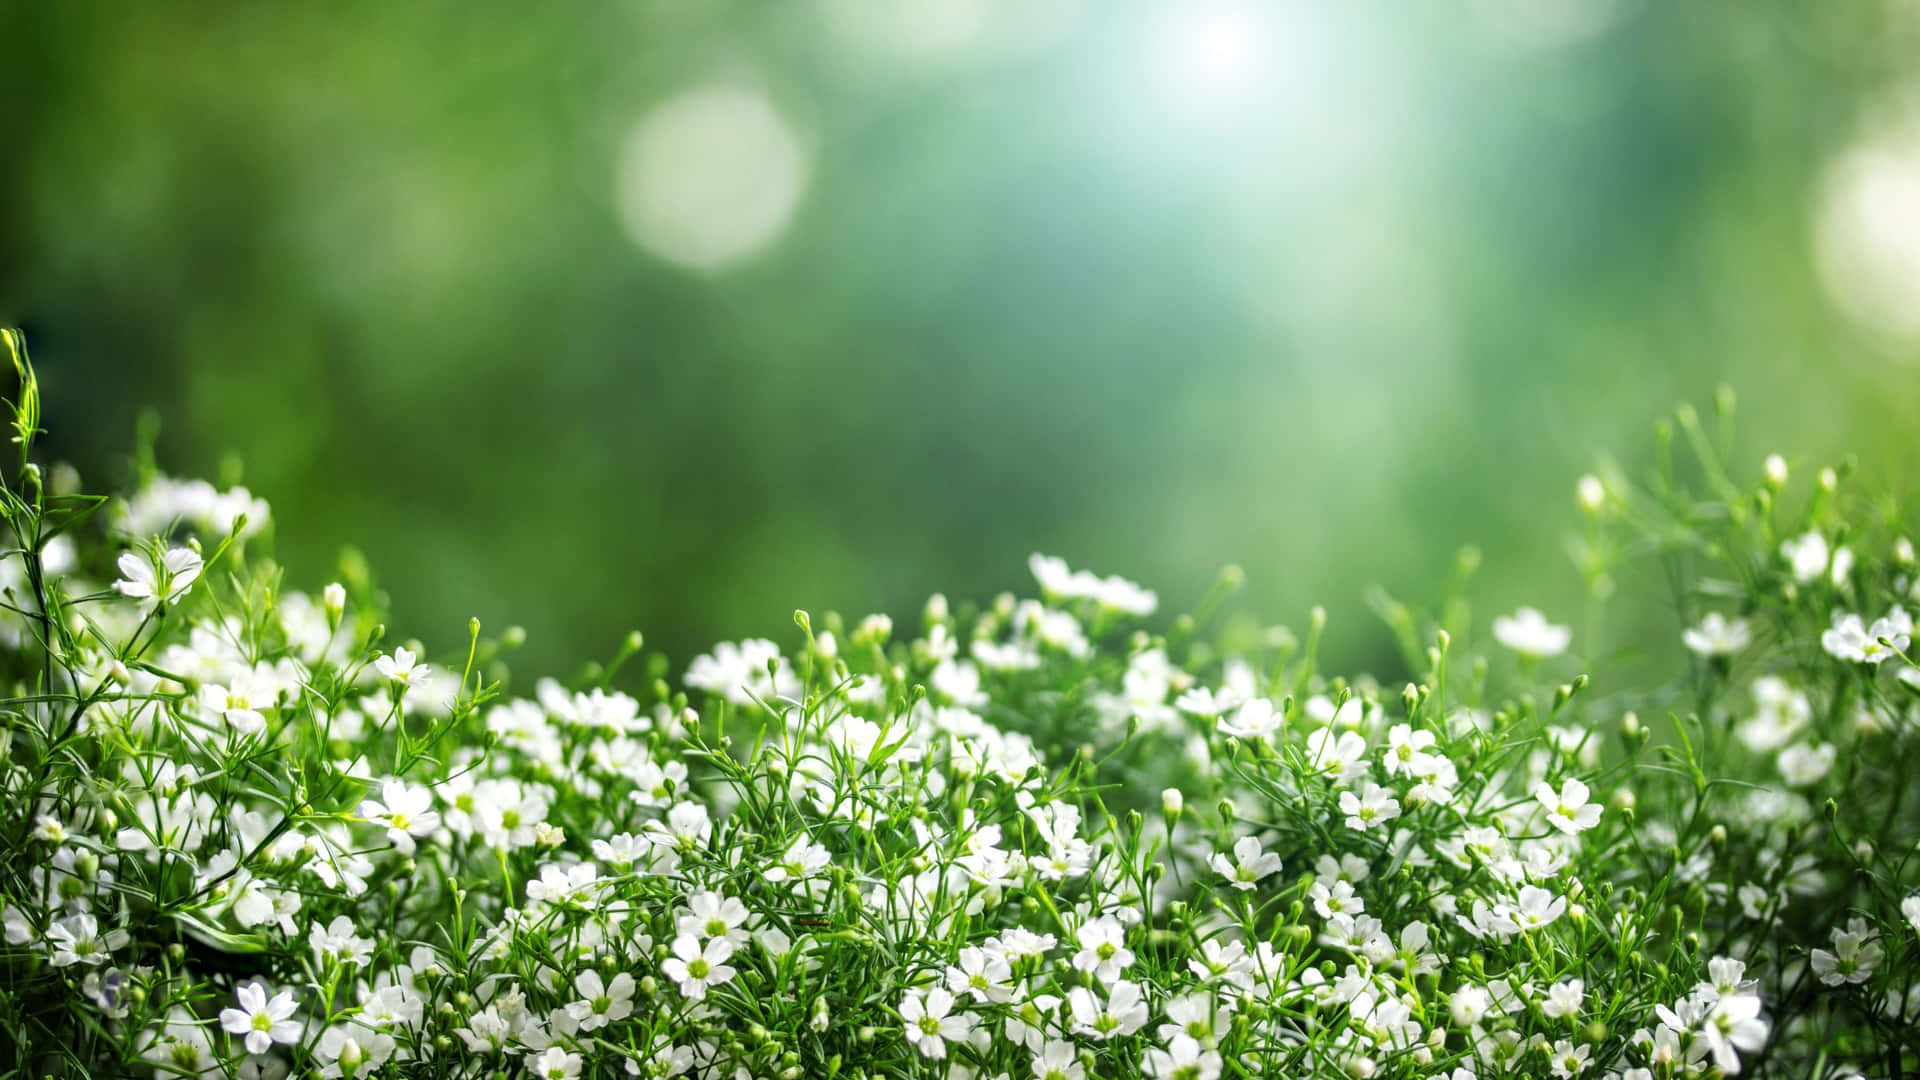 White Flowers In The Grass With Sunlight